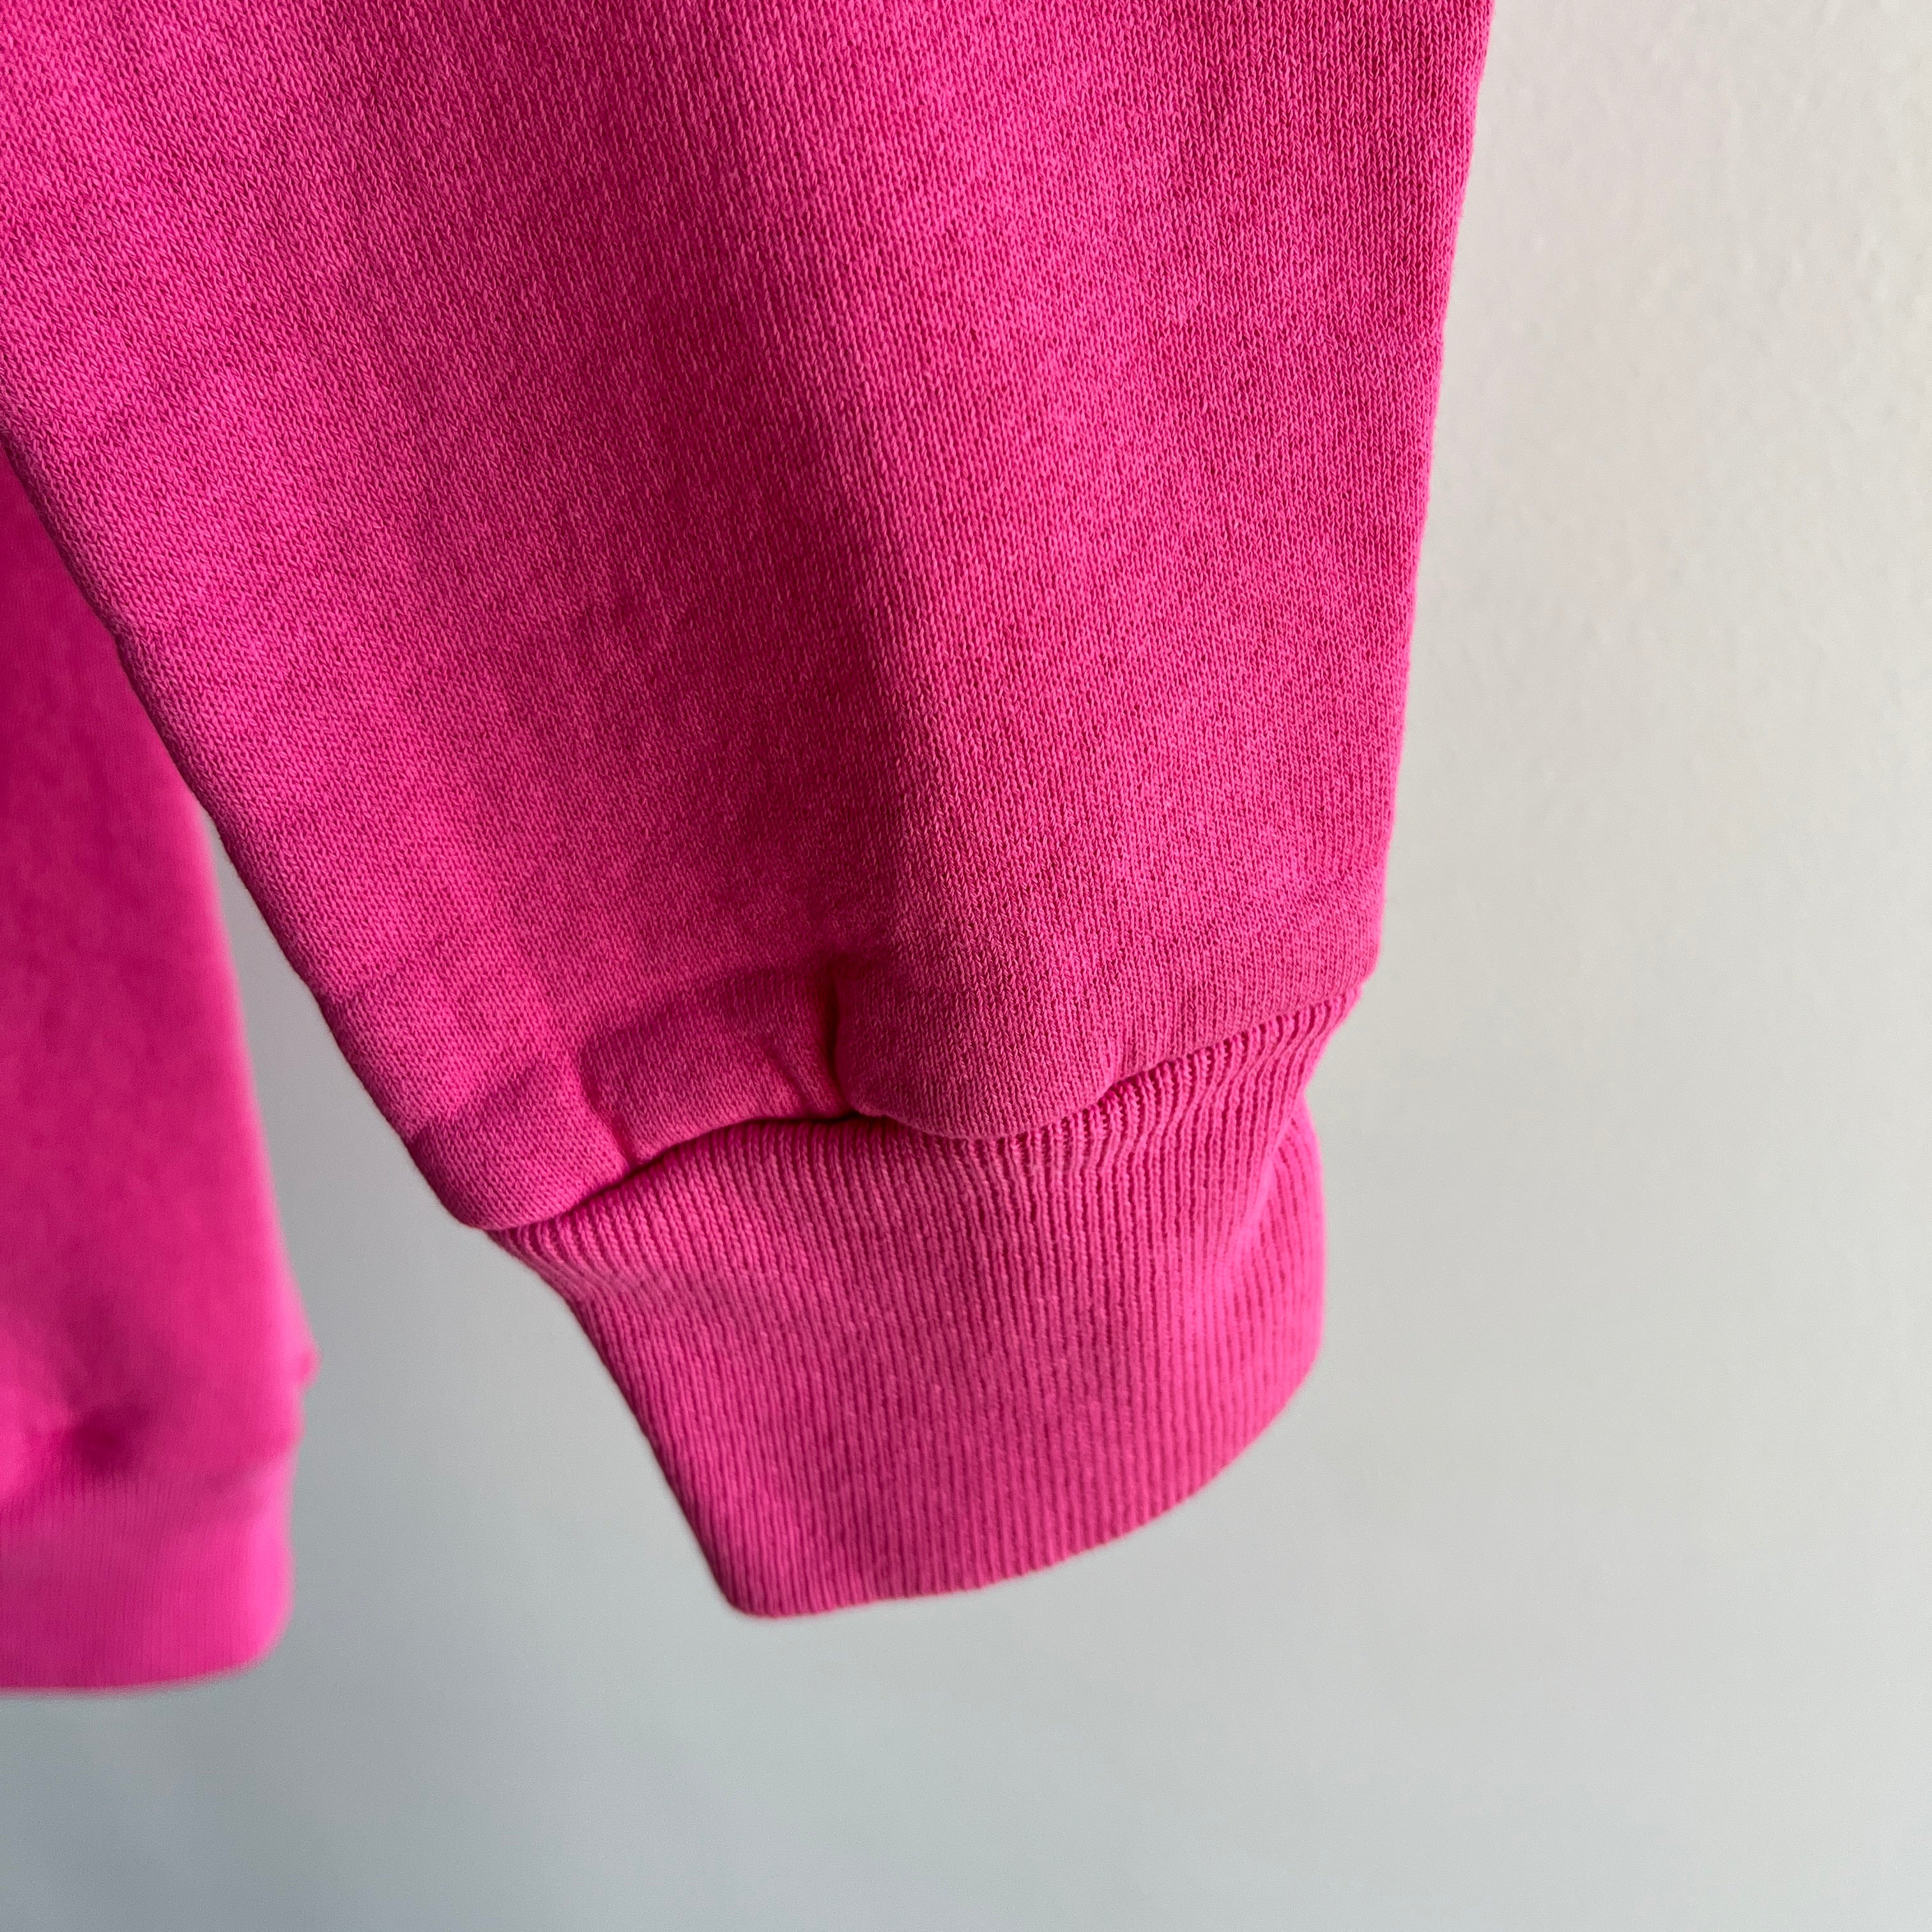 190s Barbie Colored Pink Sweatshirt - With Just The Right Amount of Thinned Out